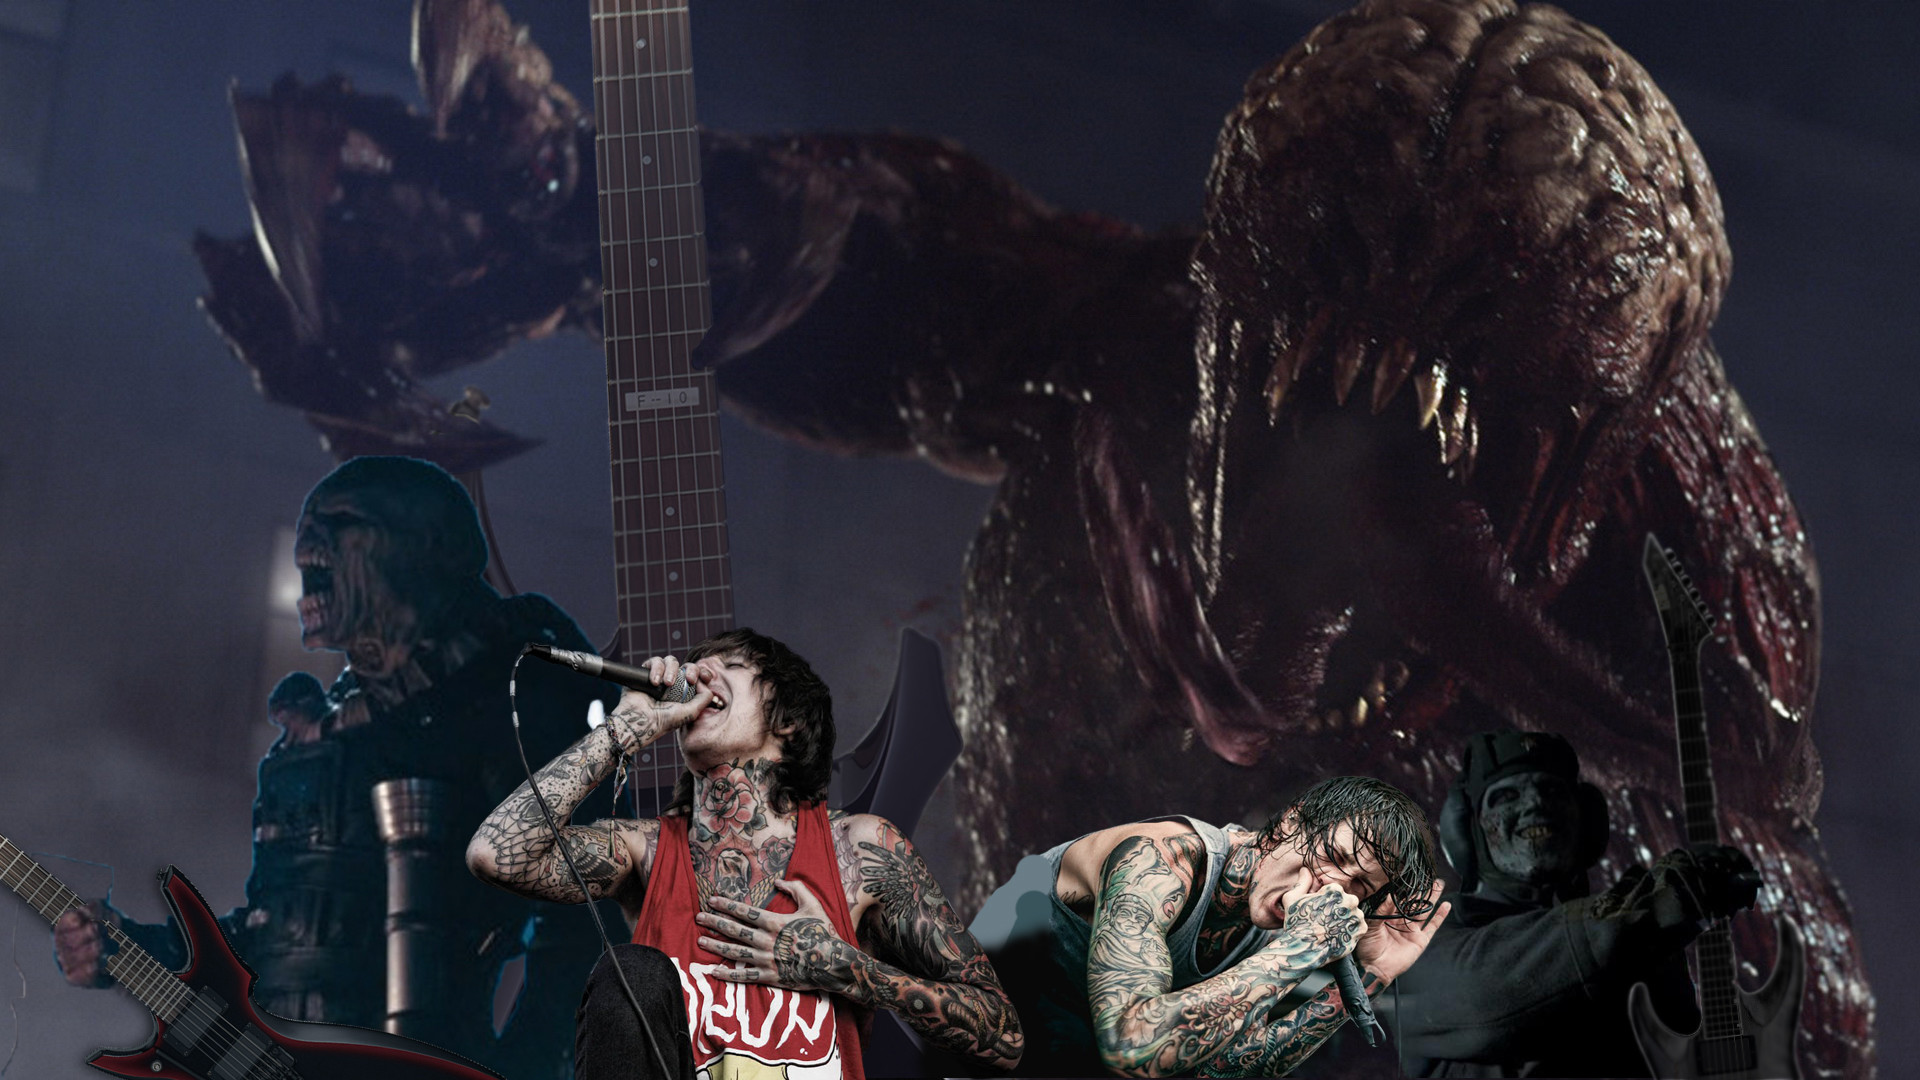 1920x1080 ... Resident Evil Band - Mitch Lucker - Oliver Sykes! by blackx600